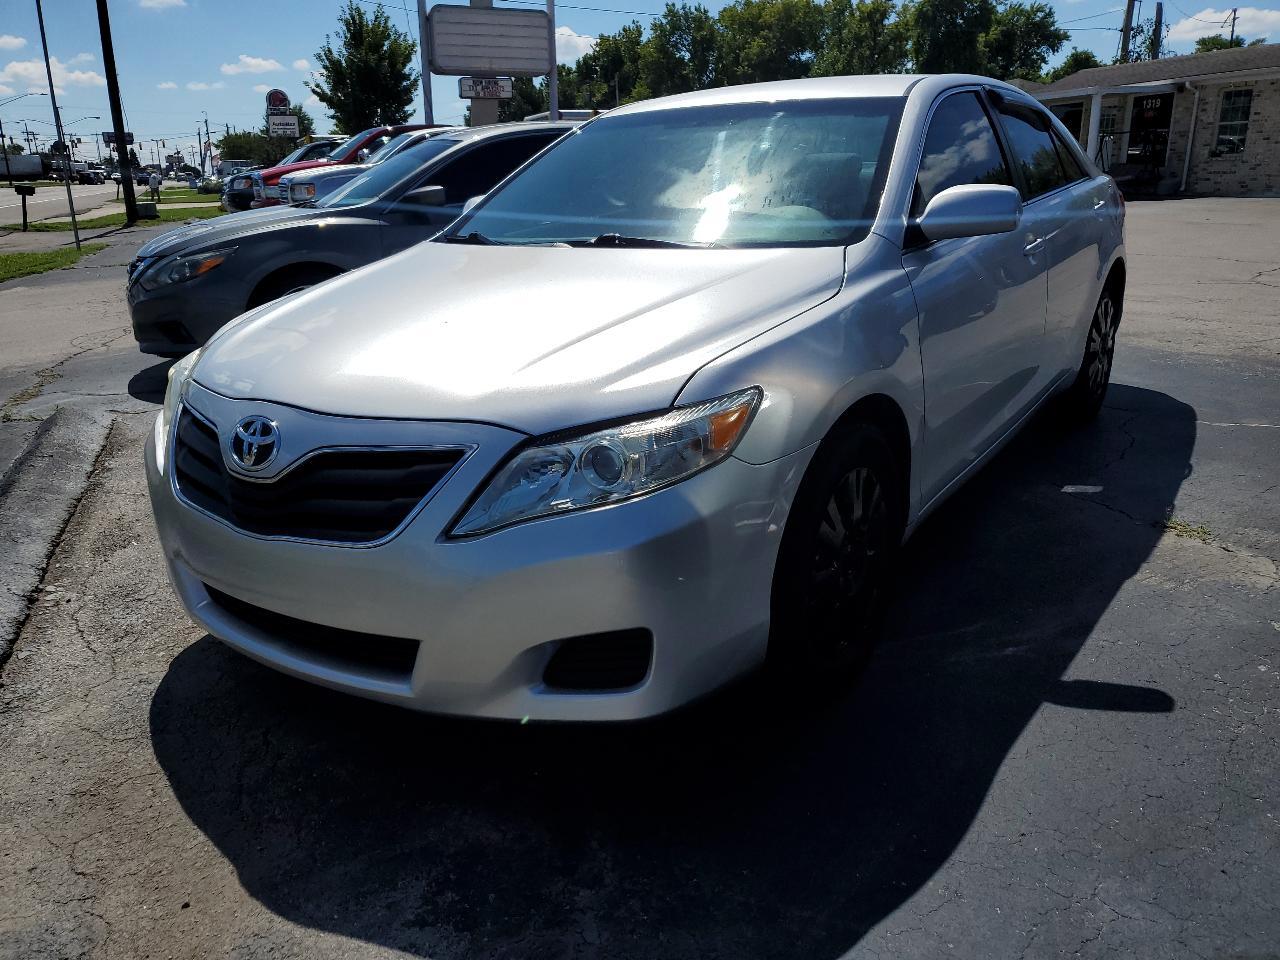 Toyota Camry 4dr Sdn I4 Man LE (Natl) 2011